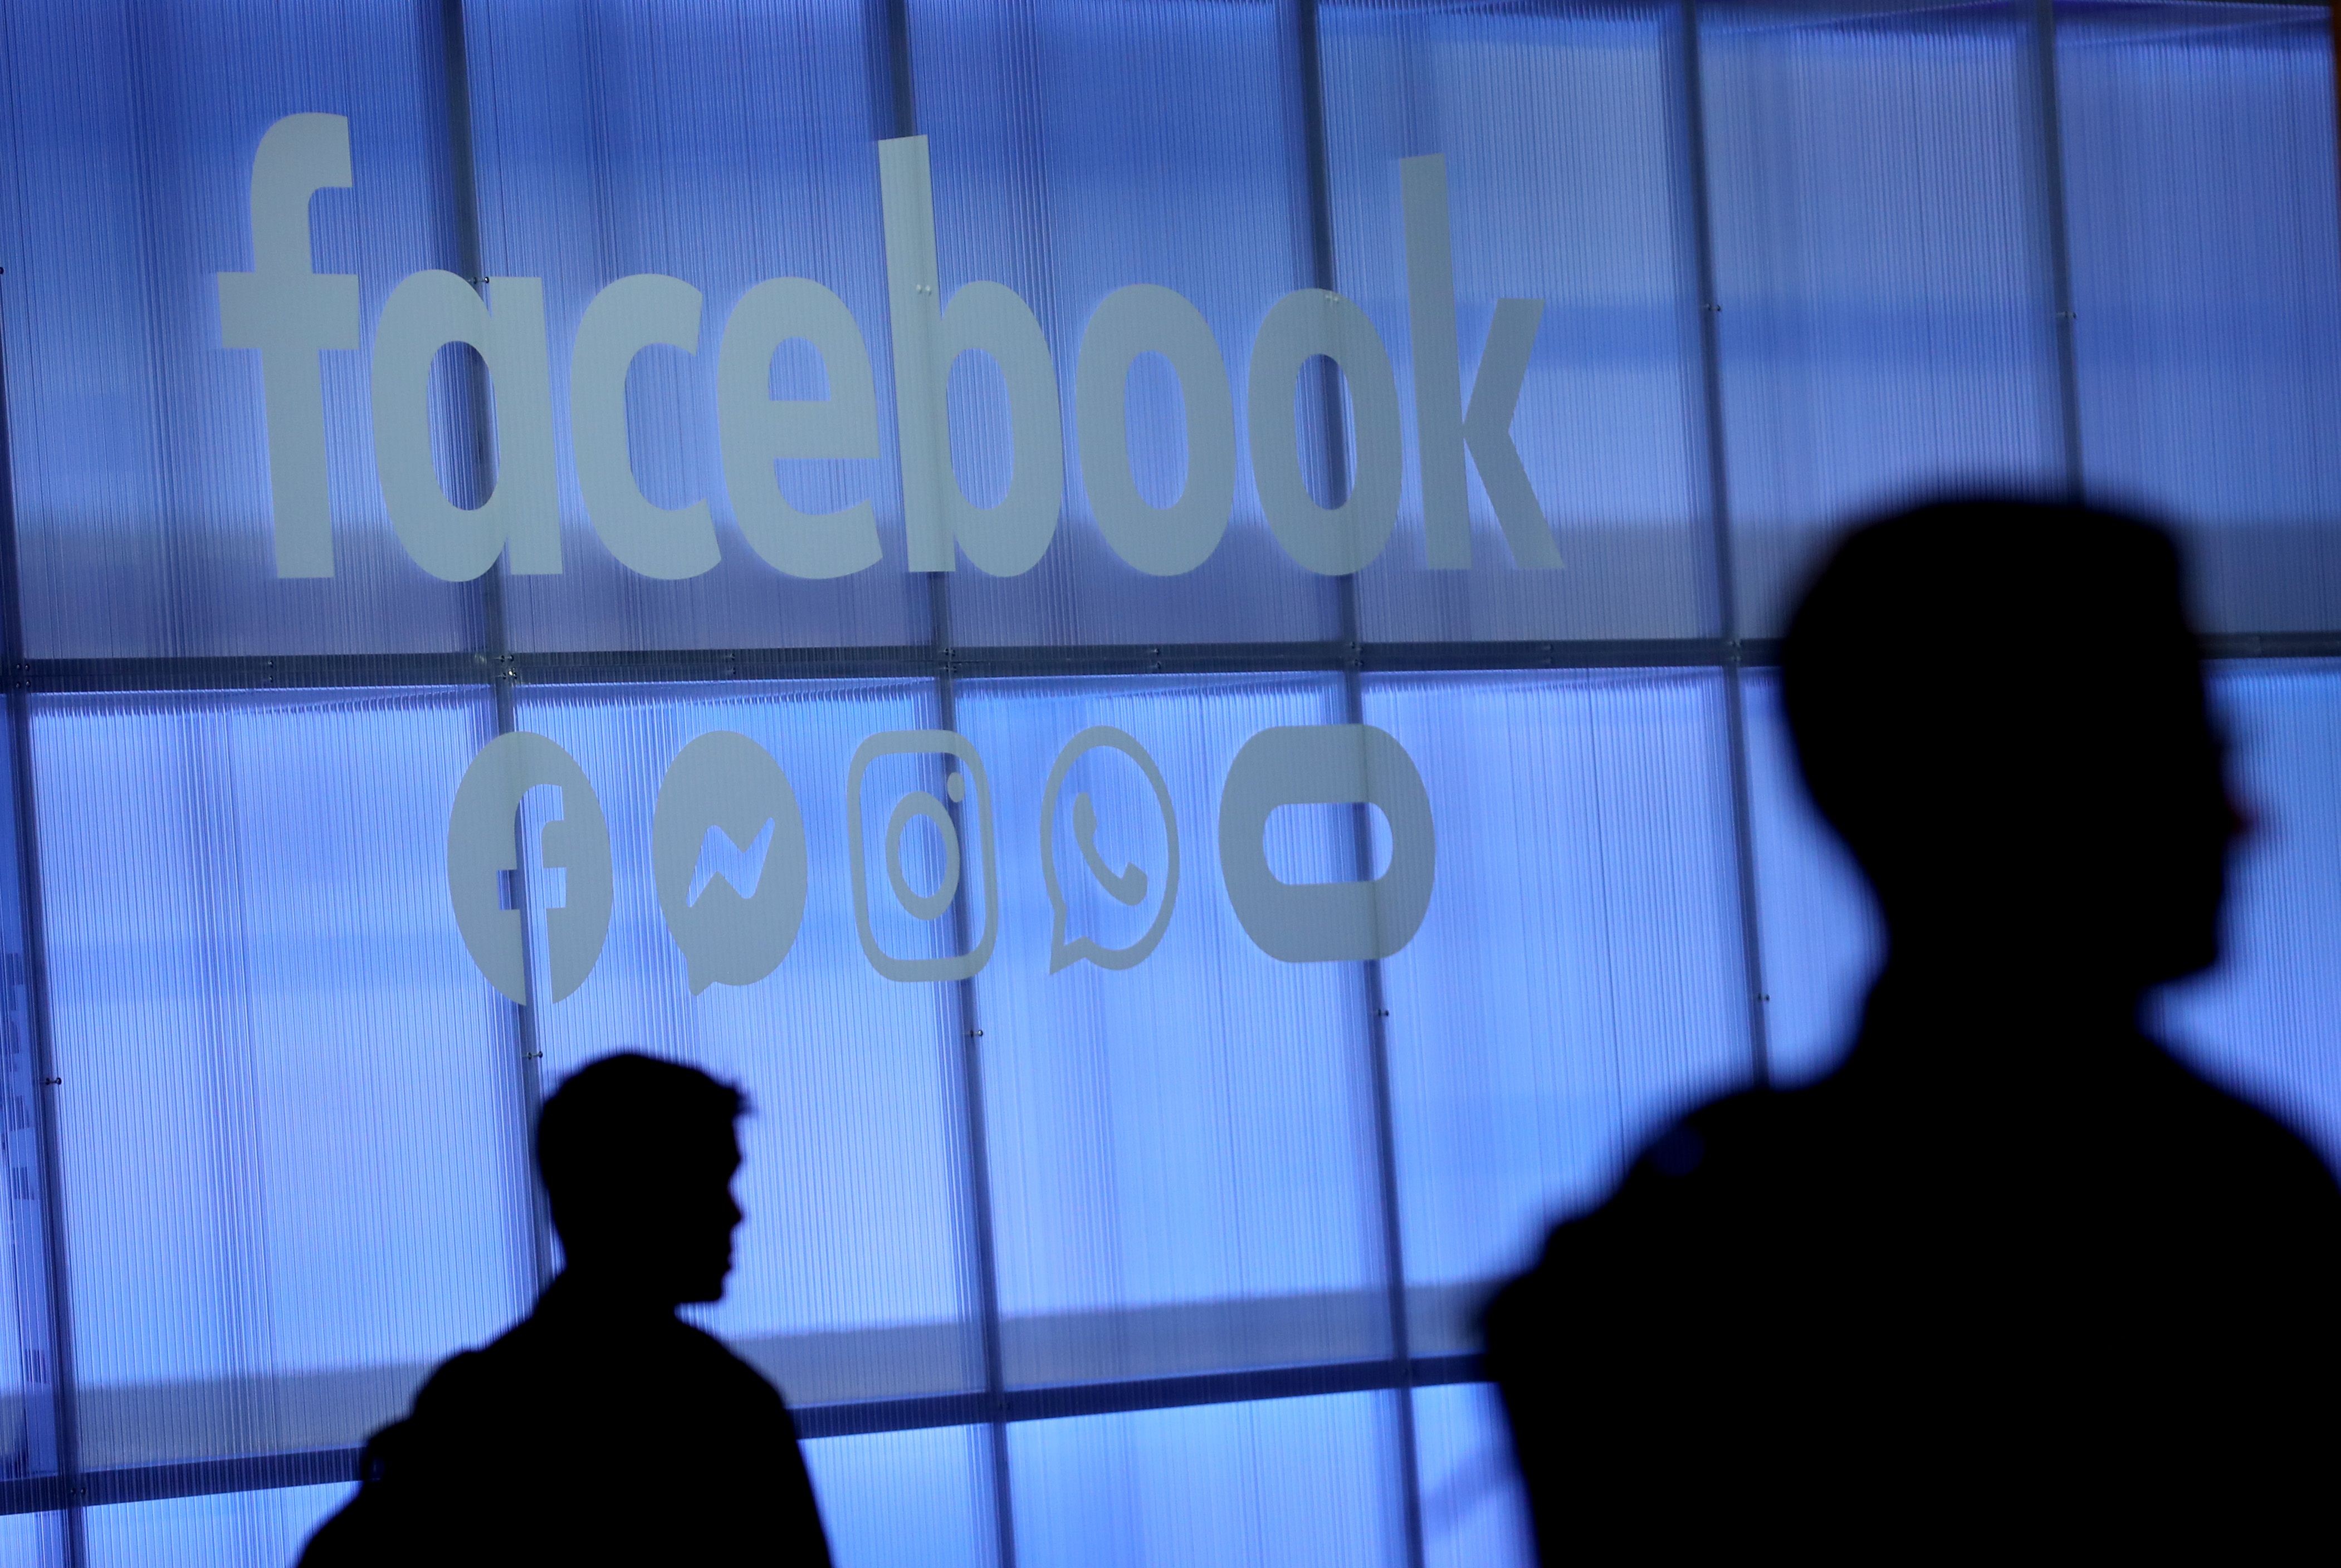 Facebook unveiled its global cryptocurrency “Libra” on June 18, in a new initiative in payments for the world’s biggest social network. Photo: AFP